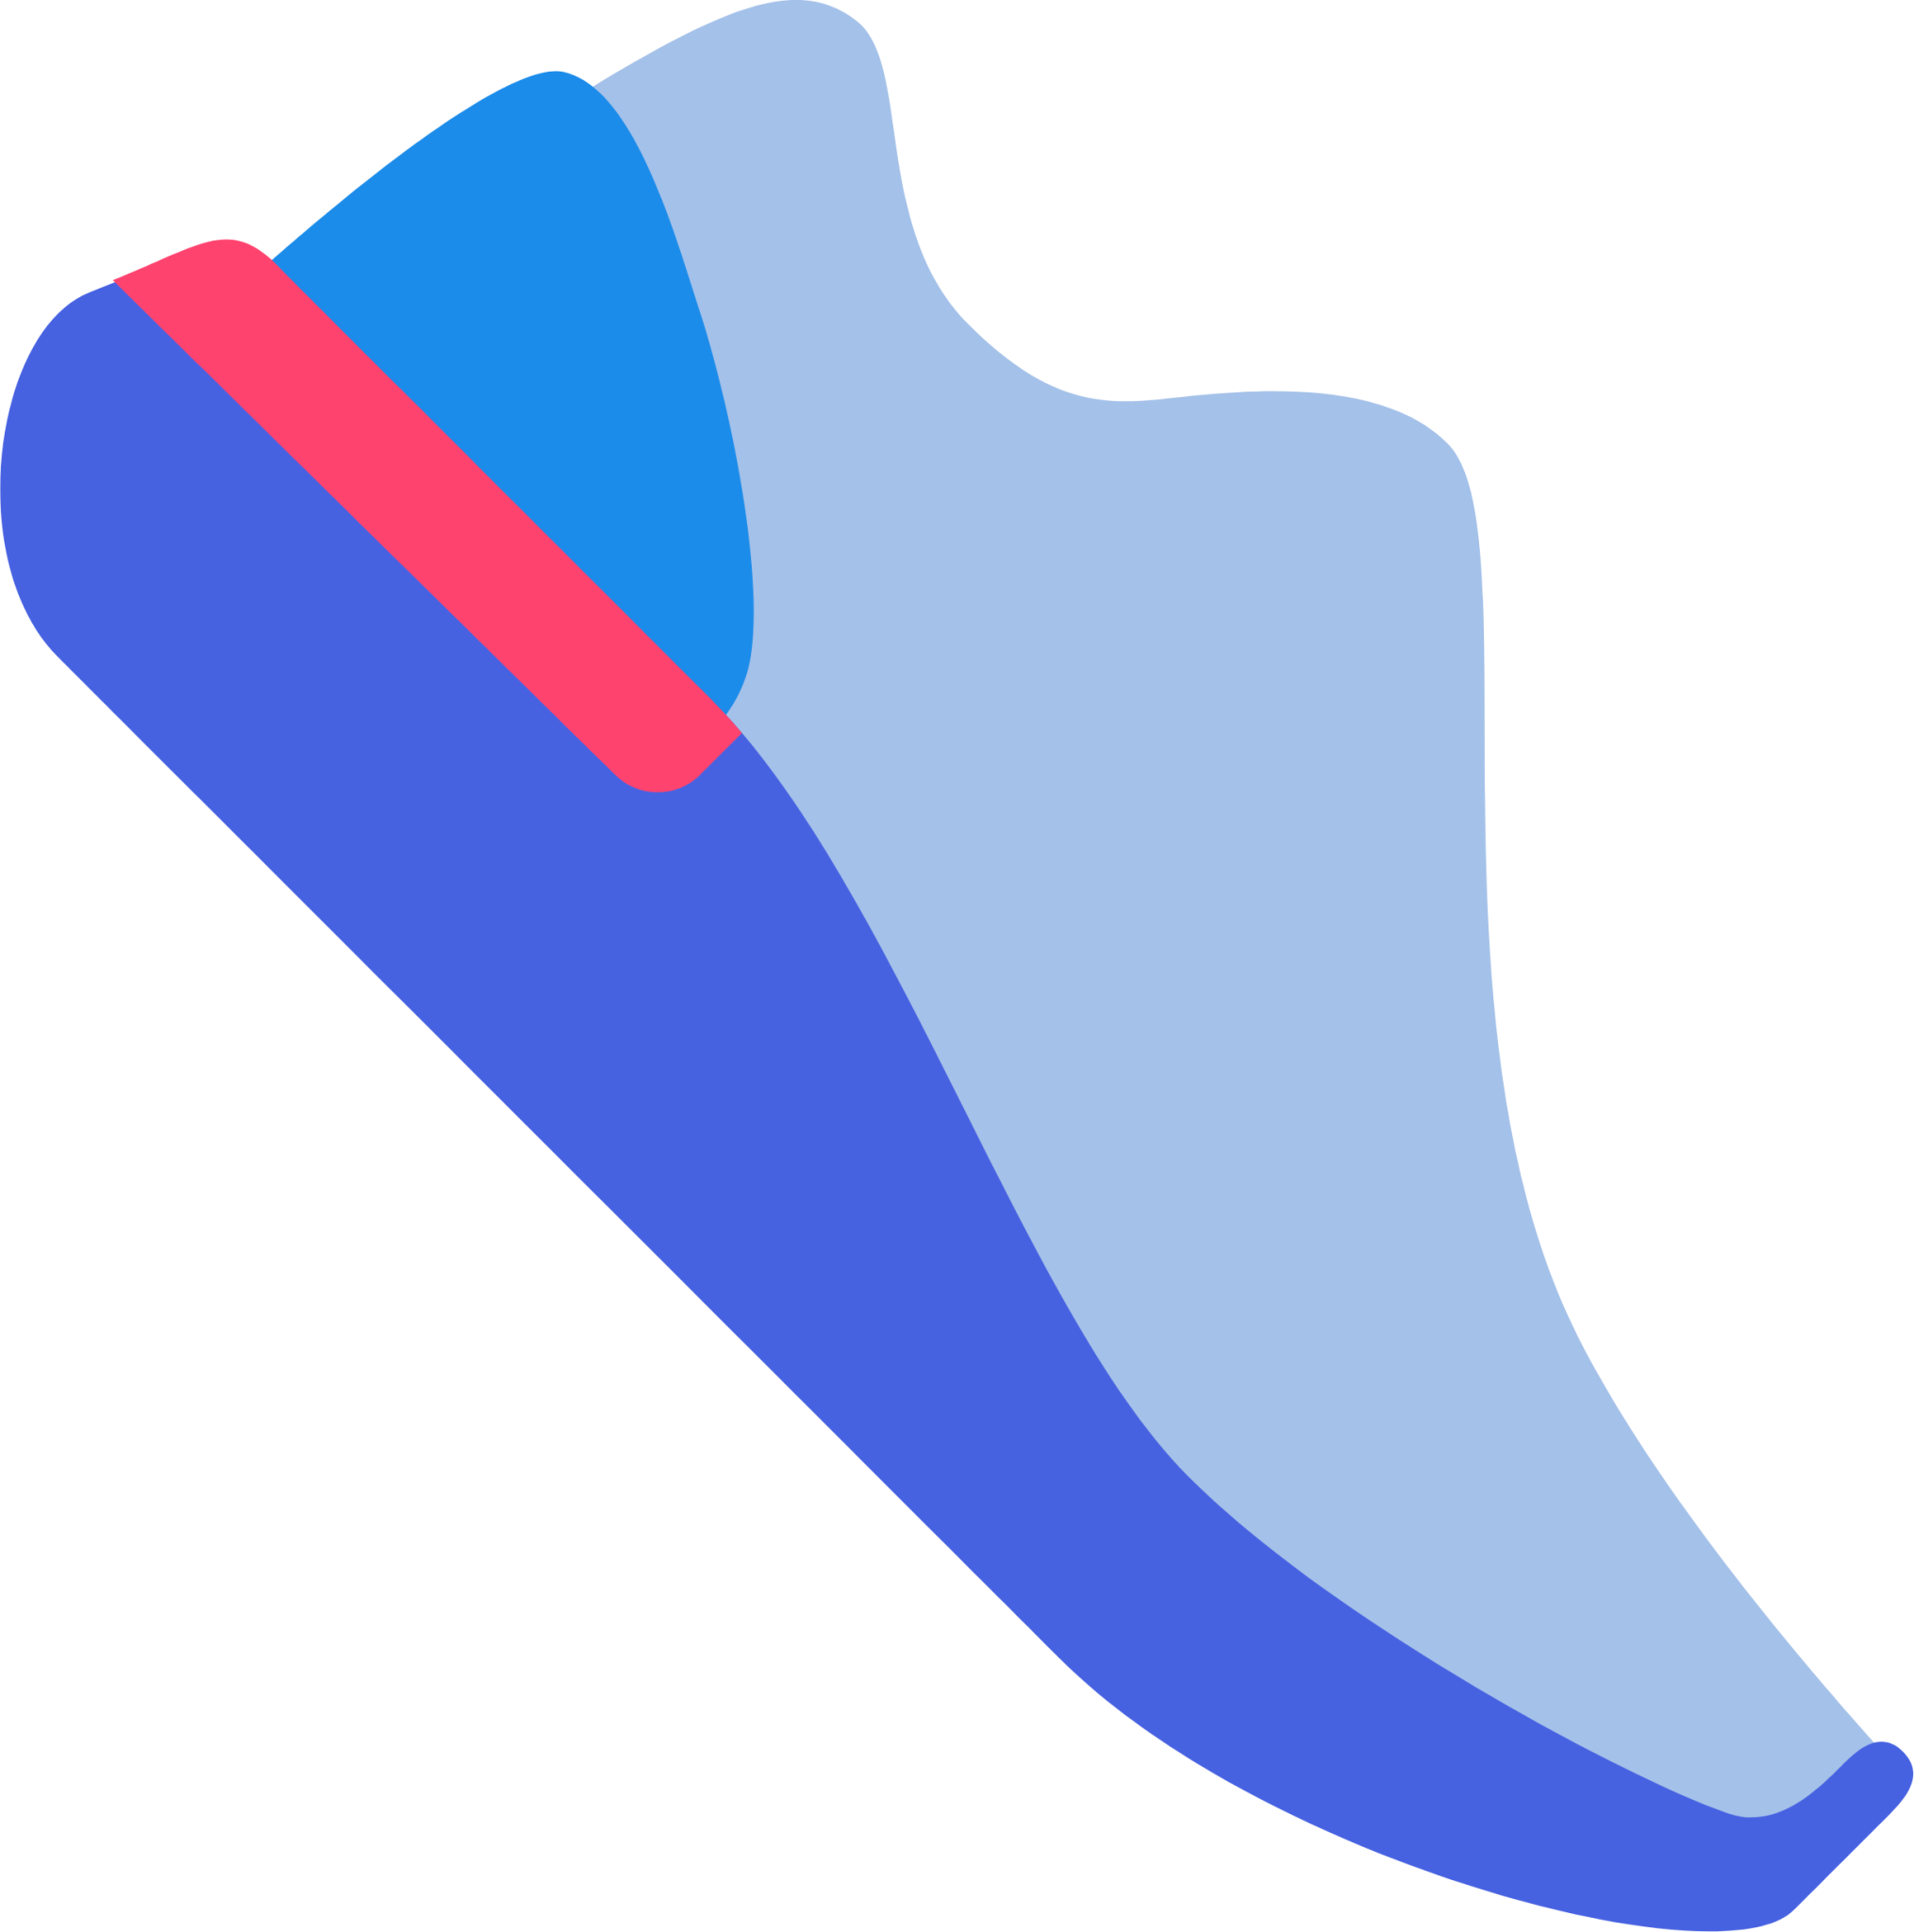 sneakers icon